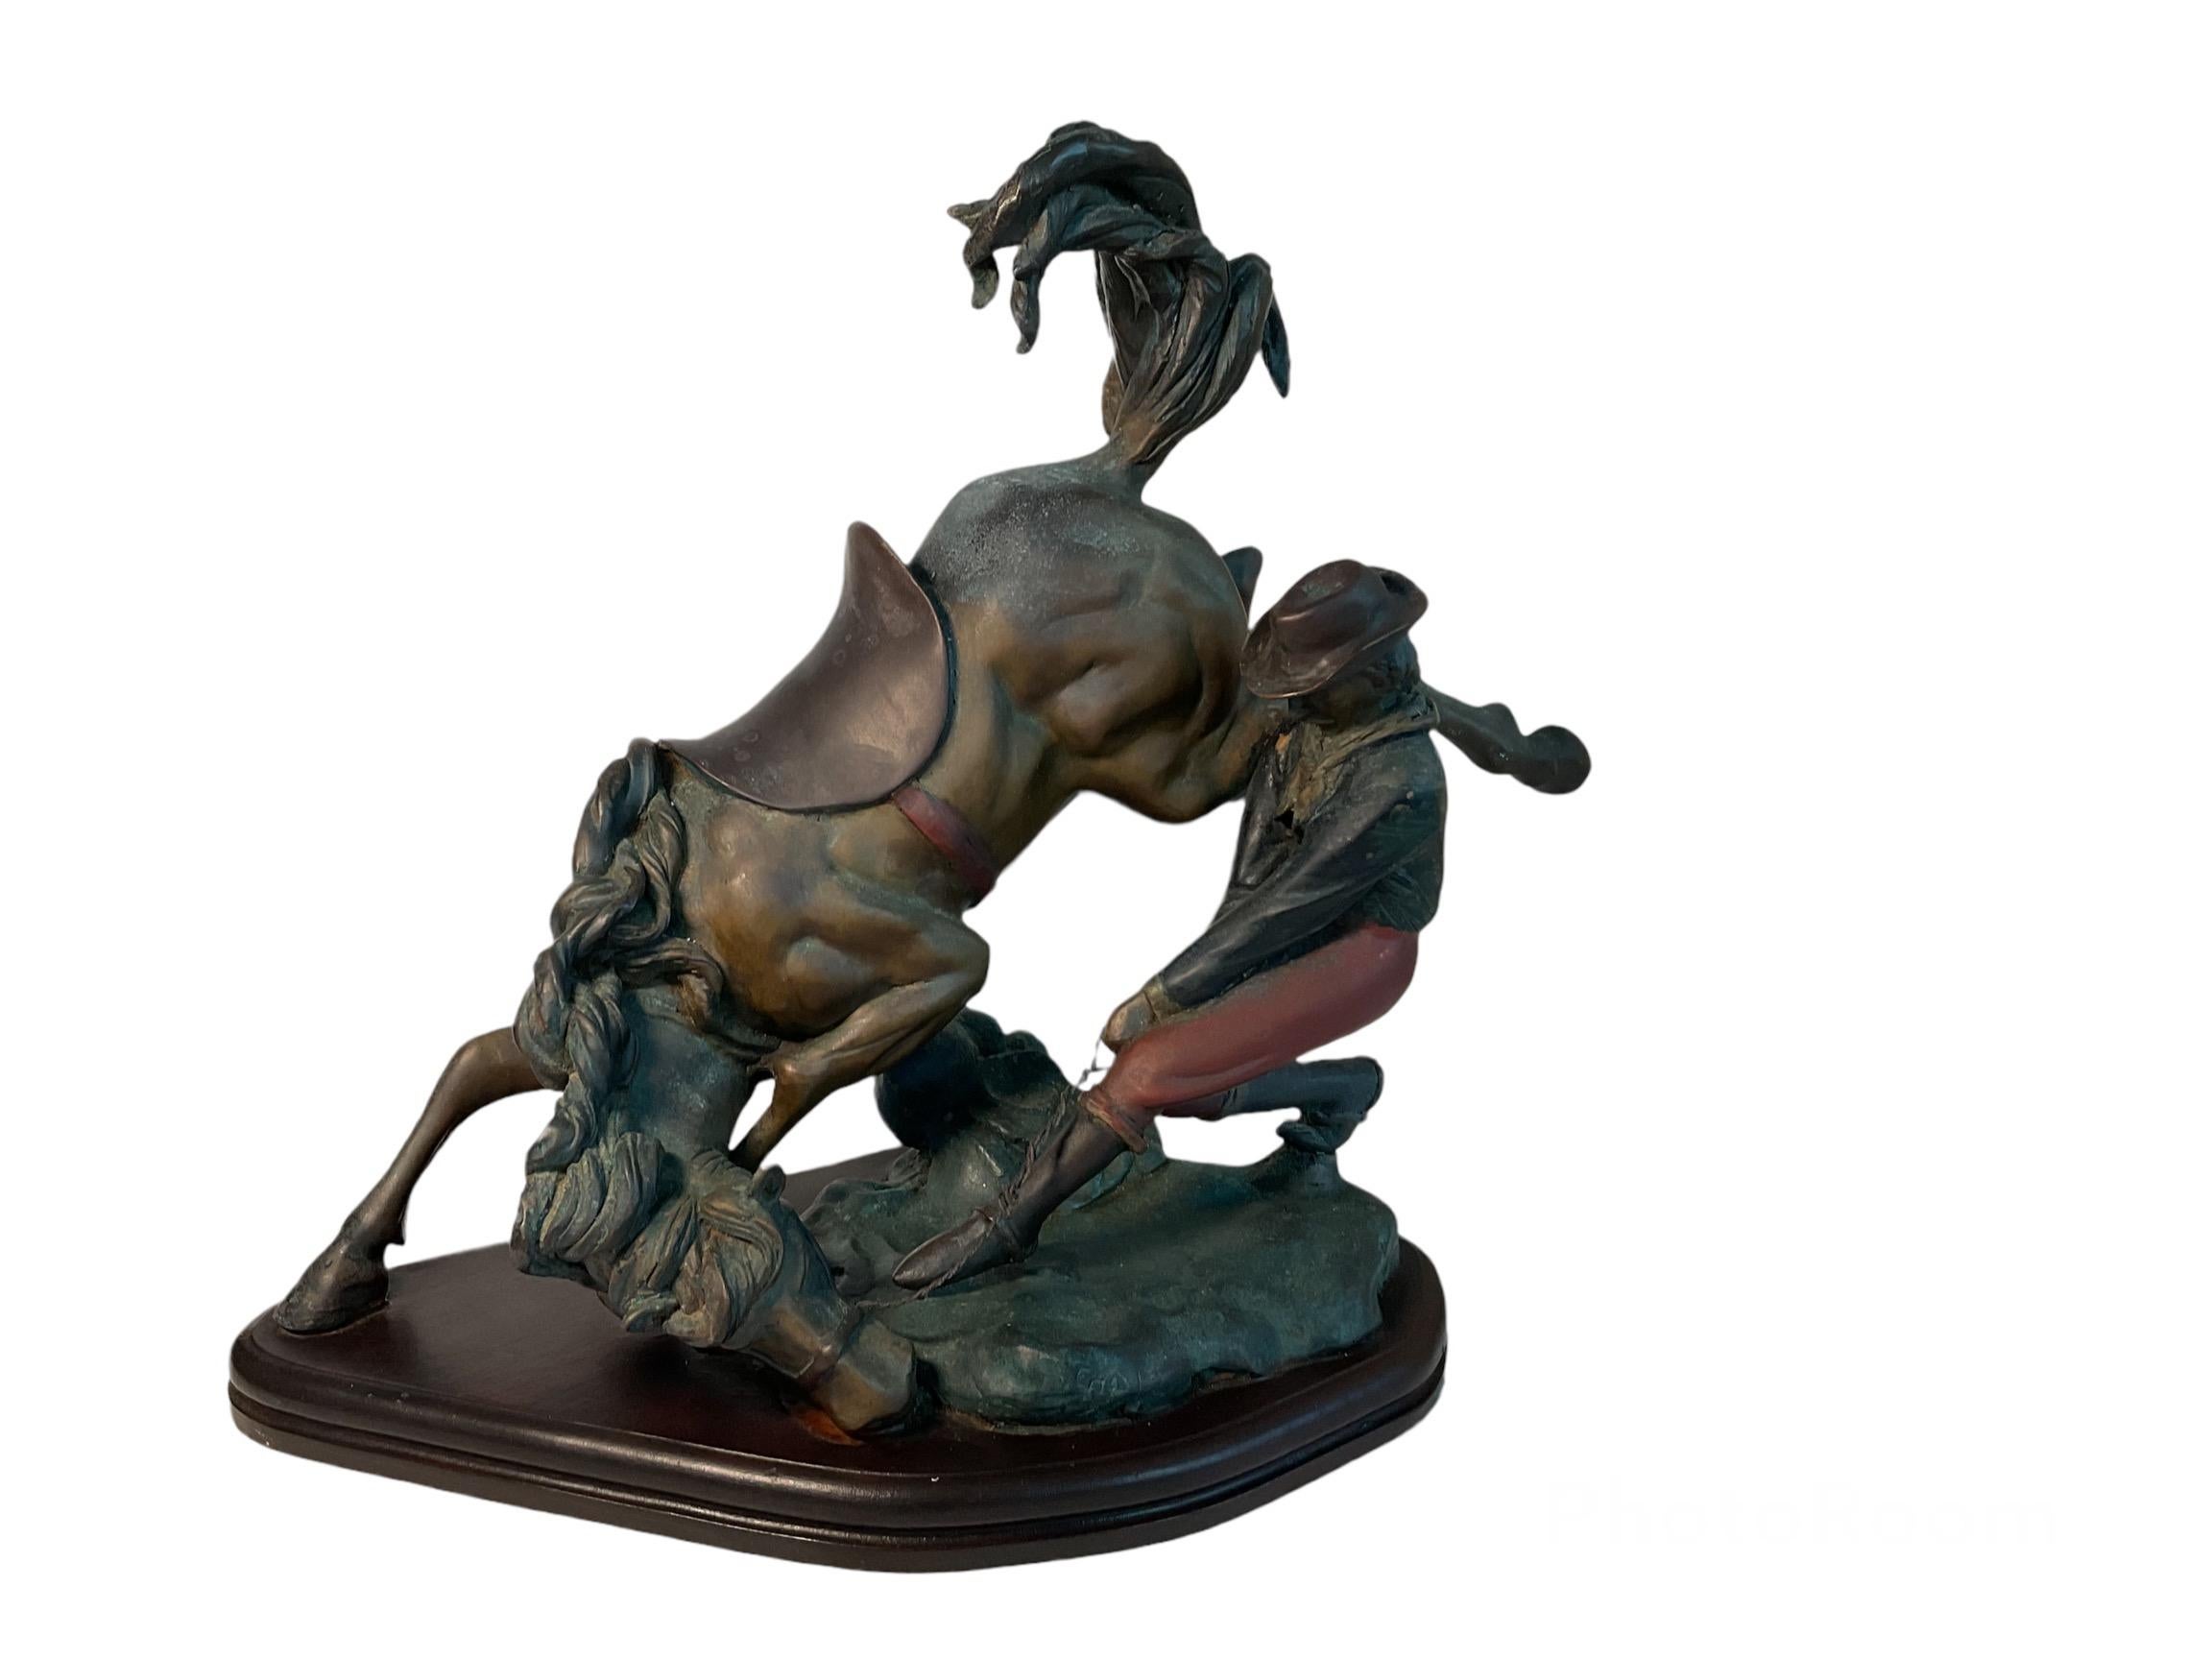 American Classical Bronze Sculpture of a Conquered Bucking Horse For Sale